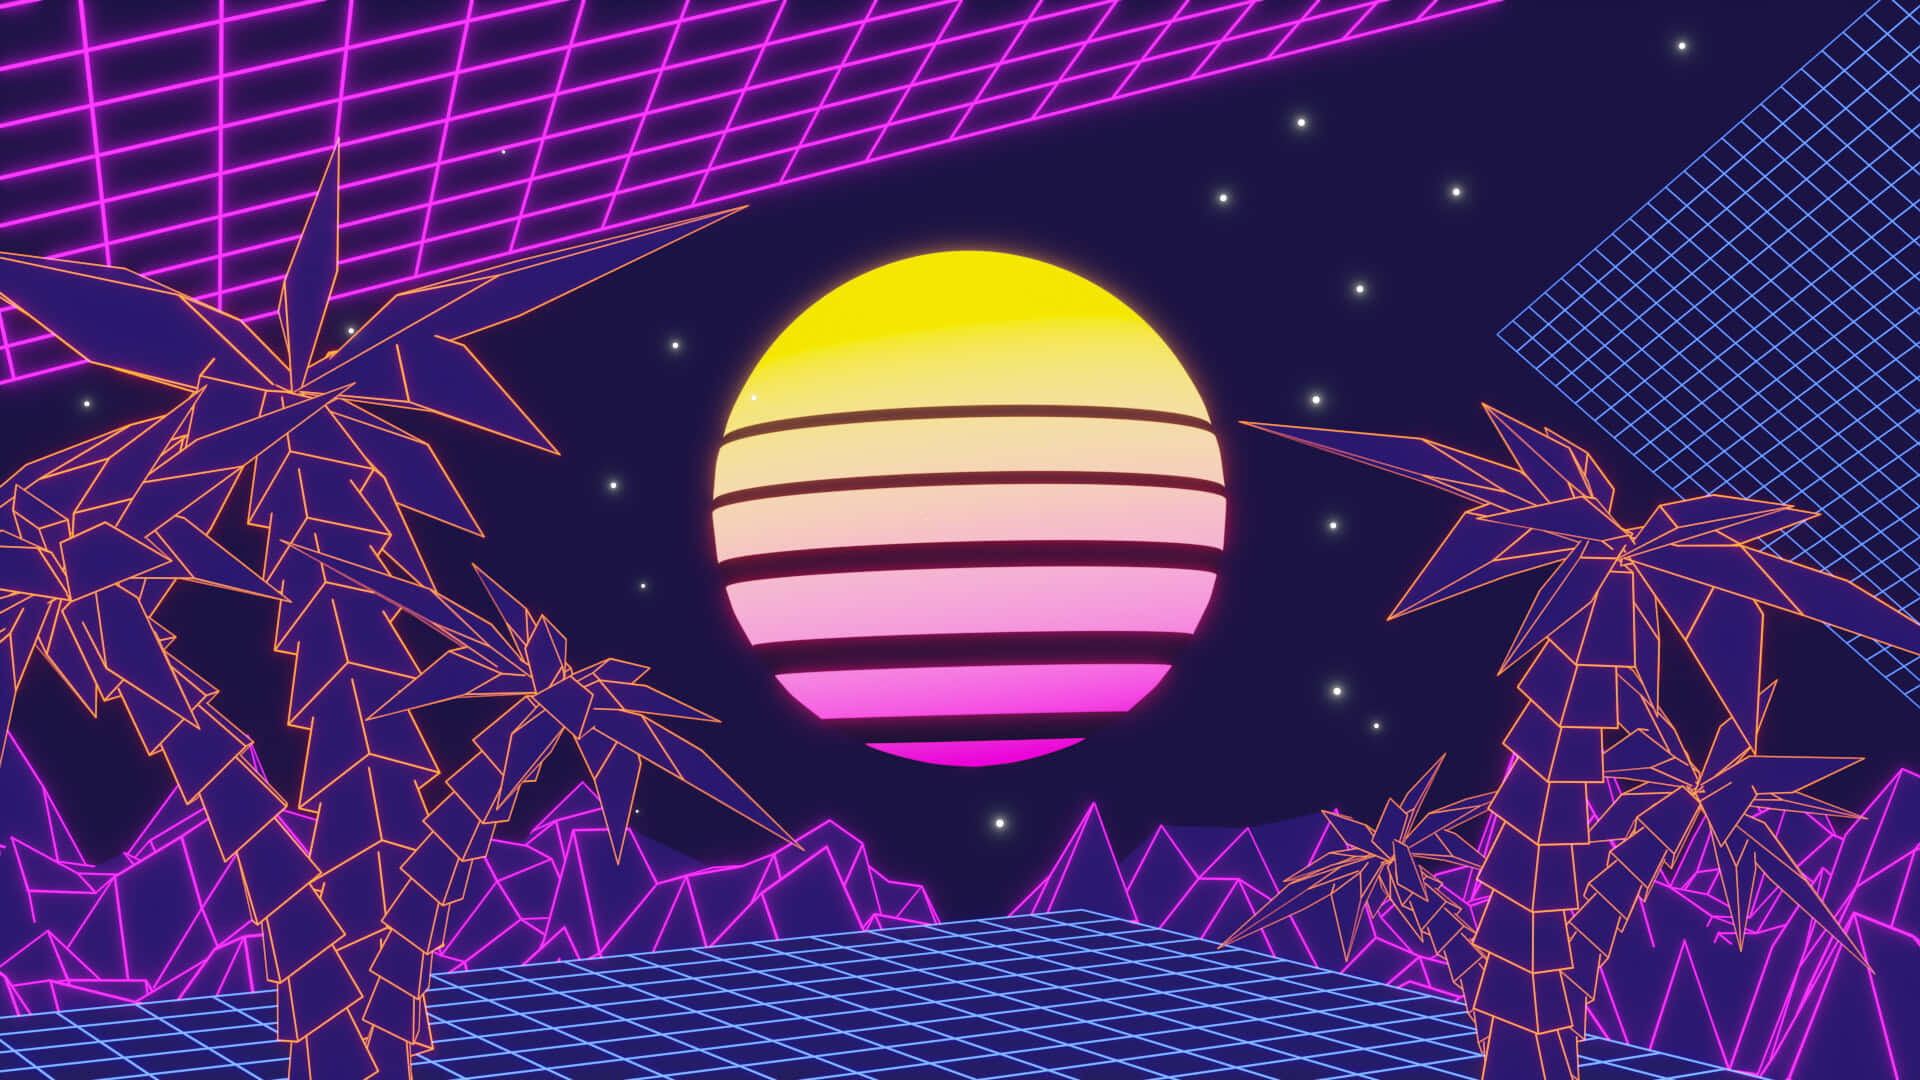 Moon With Neon Tropical Vaporwave Background